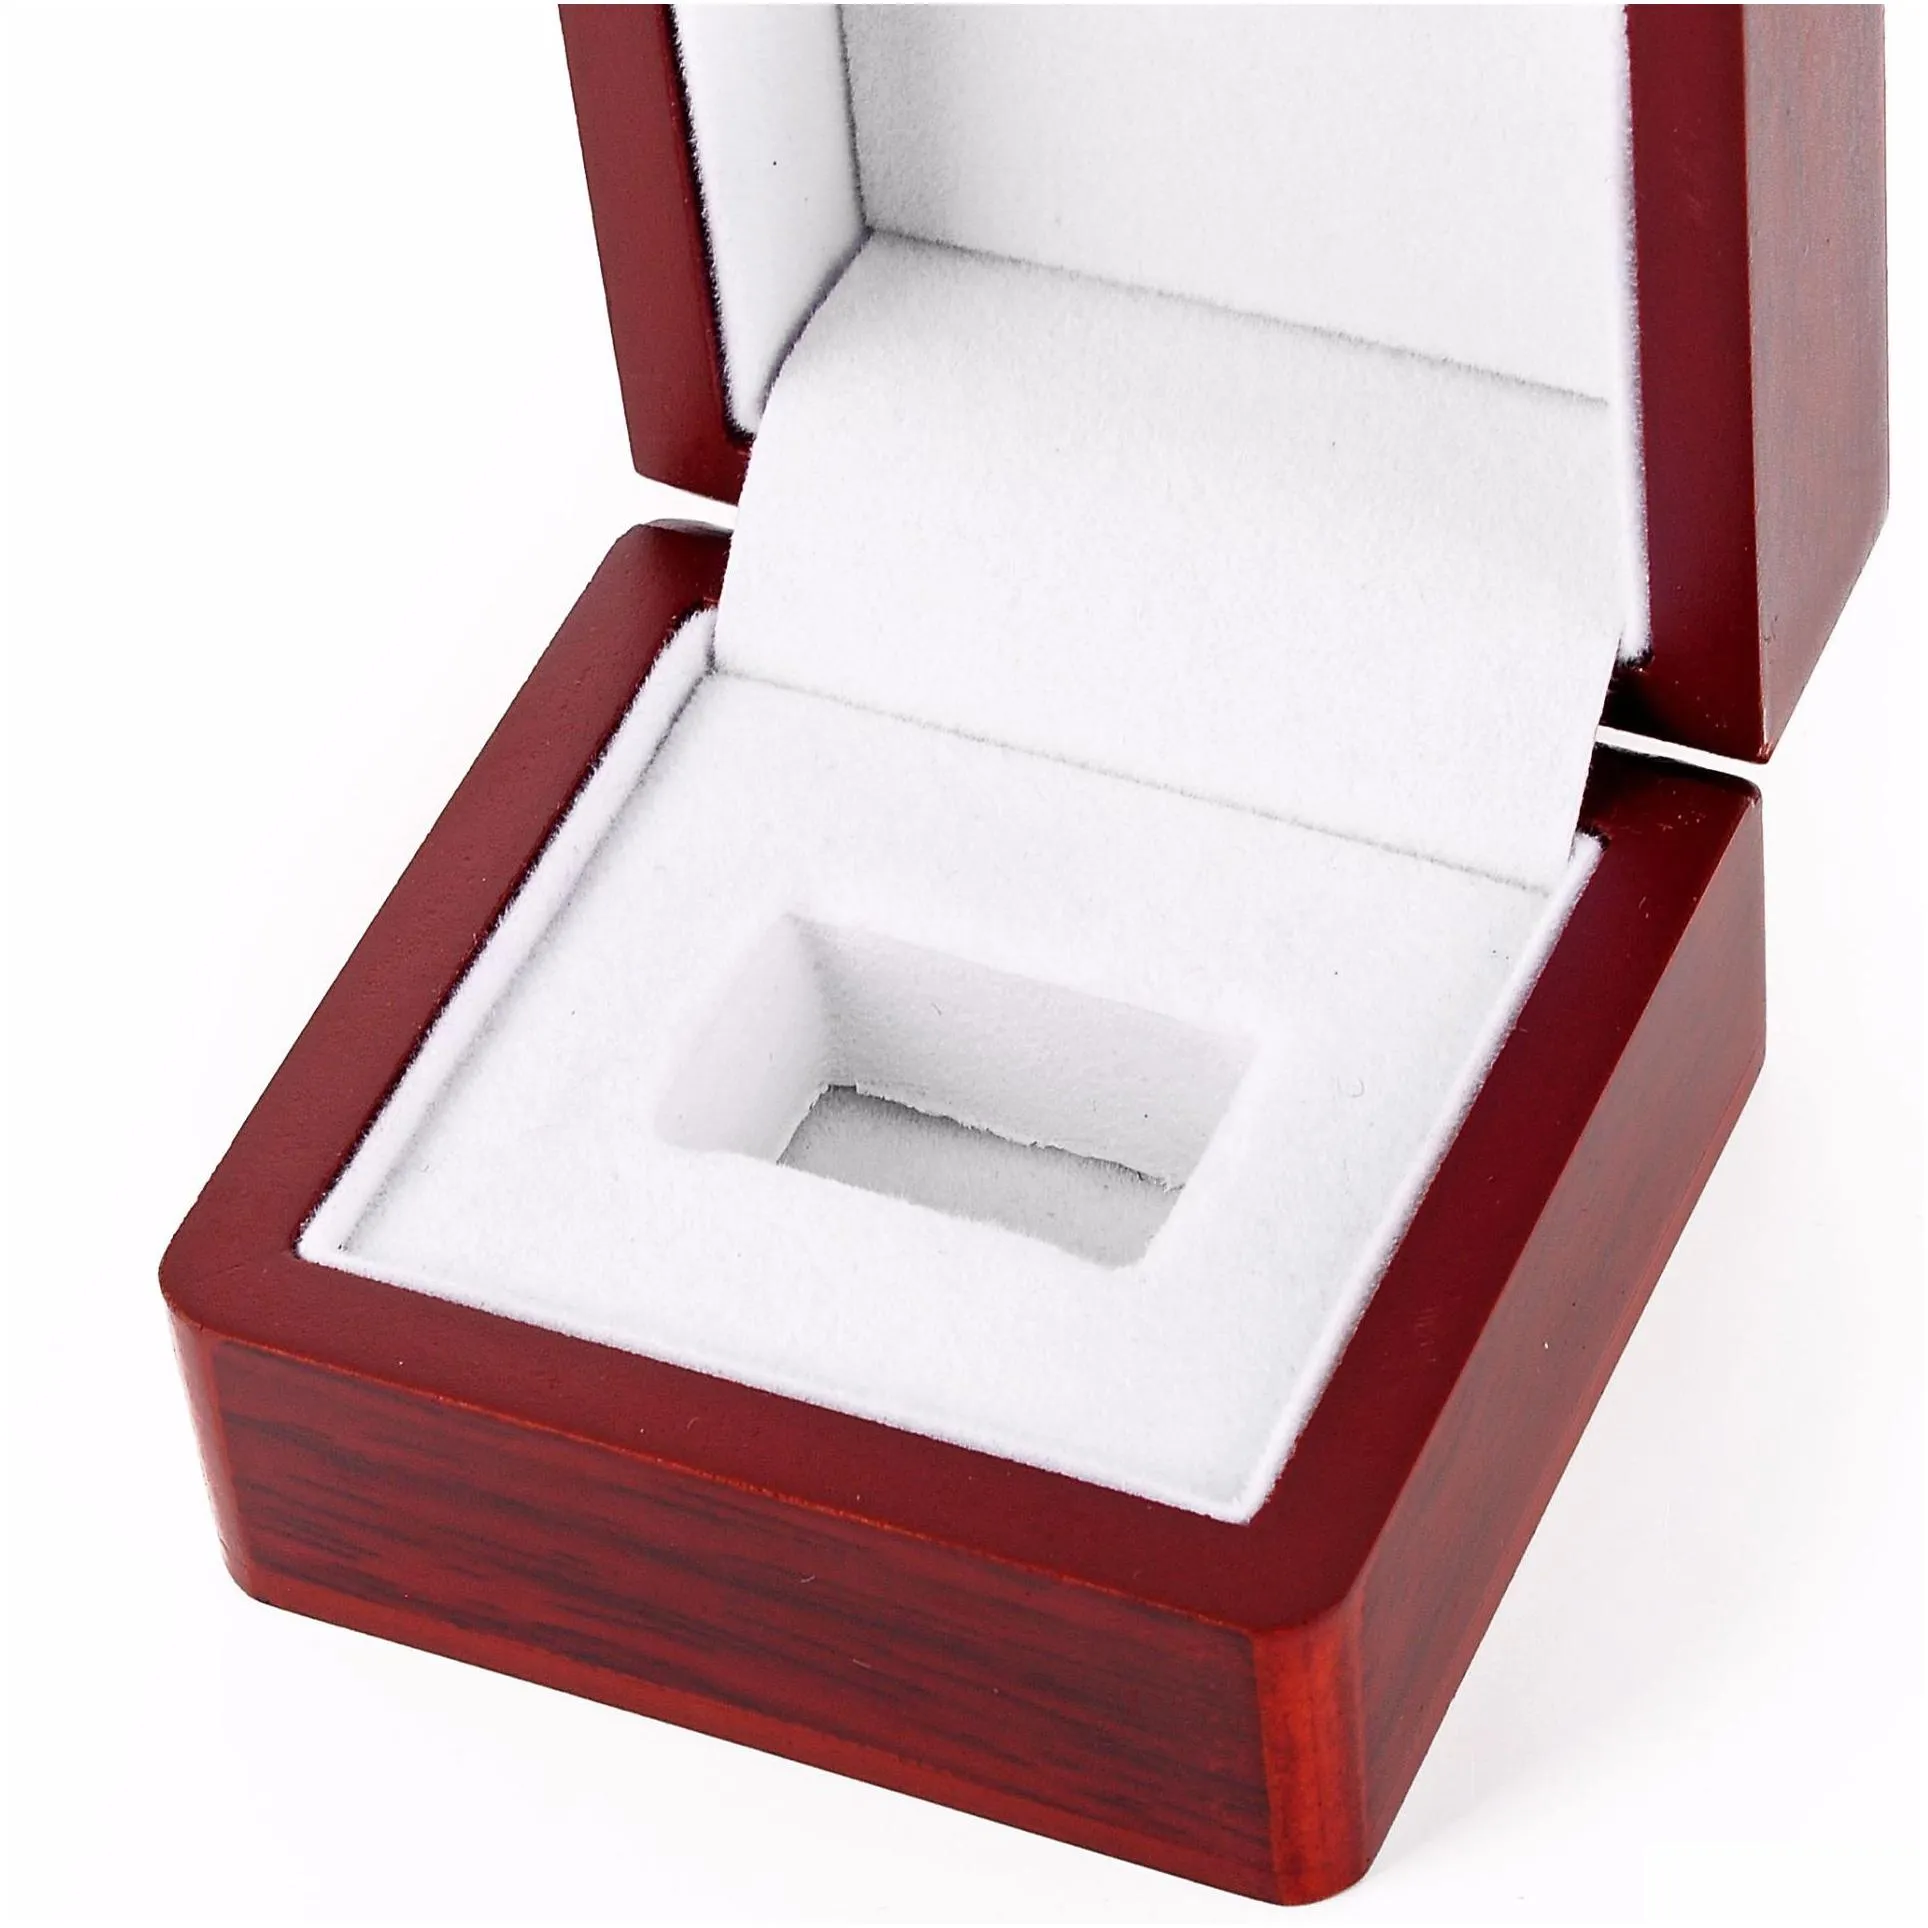 Other Fashion Accessories Wooden Display Box Ship Ring Collectors Case 1 Slot05138942 Drop Delivery Dh4Bs